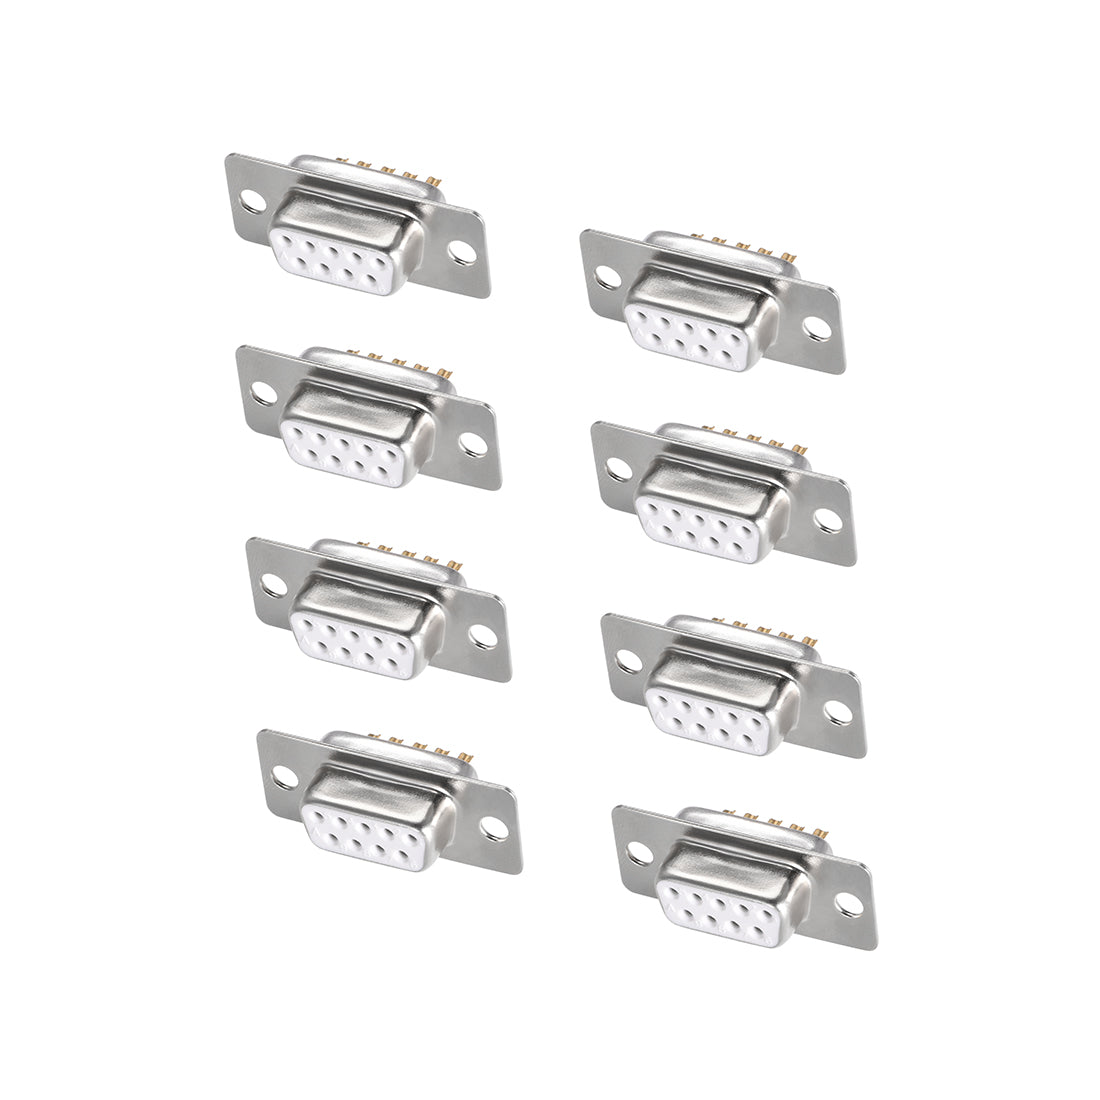 uxcell Uxcell D-sub Connector DB9 Female Socket 9-pin 2-row Port Terminal Breakout for Mechanical Equipment CNC Computers White 8pcs